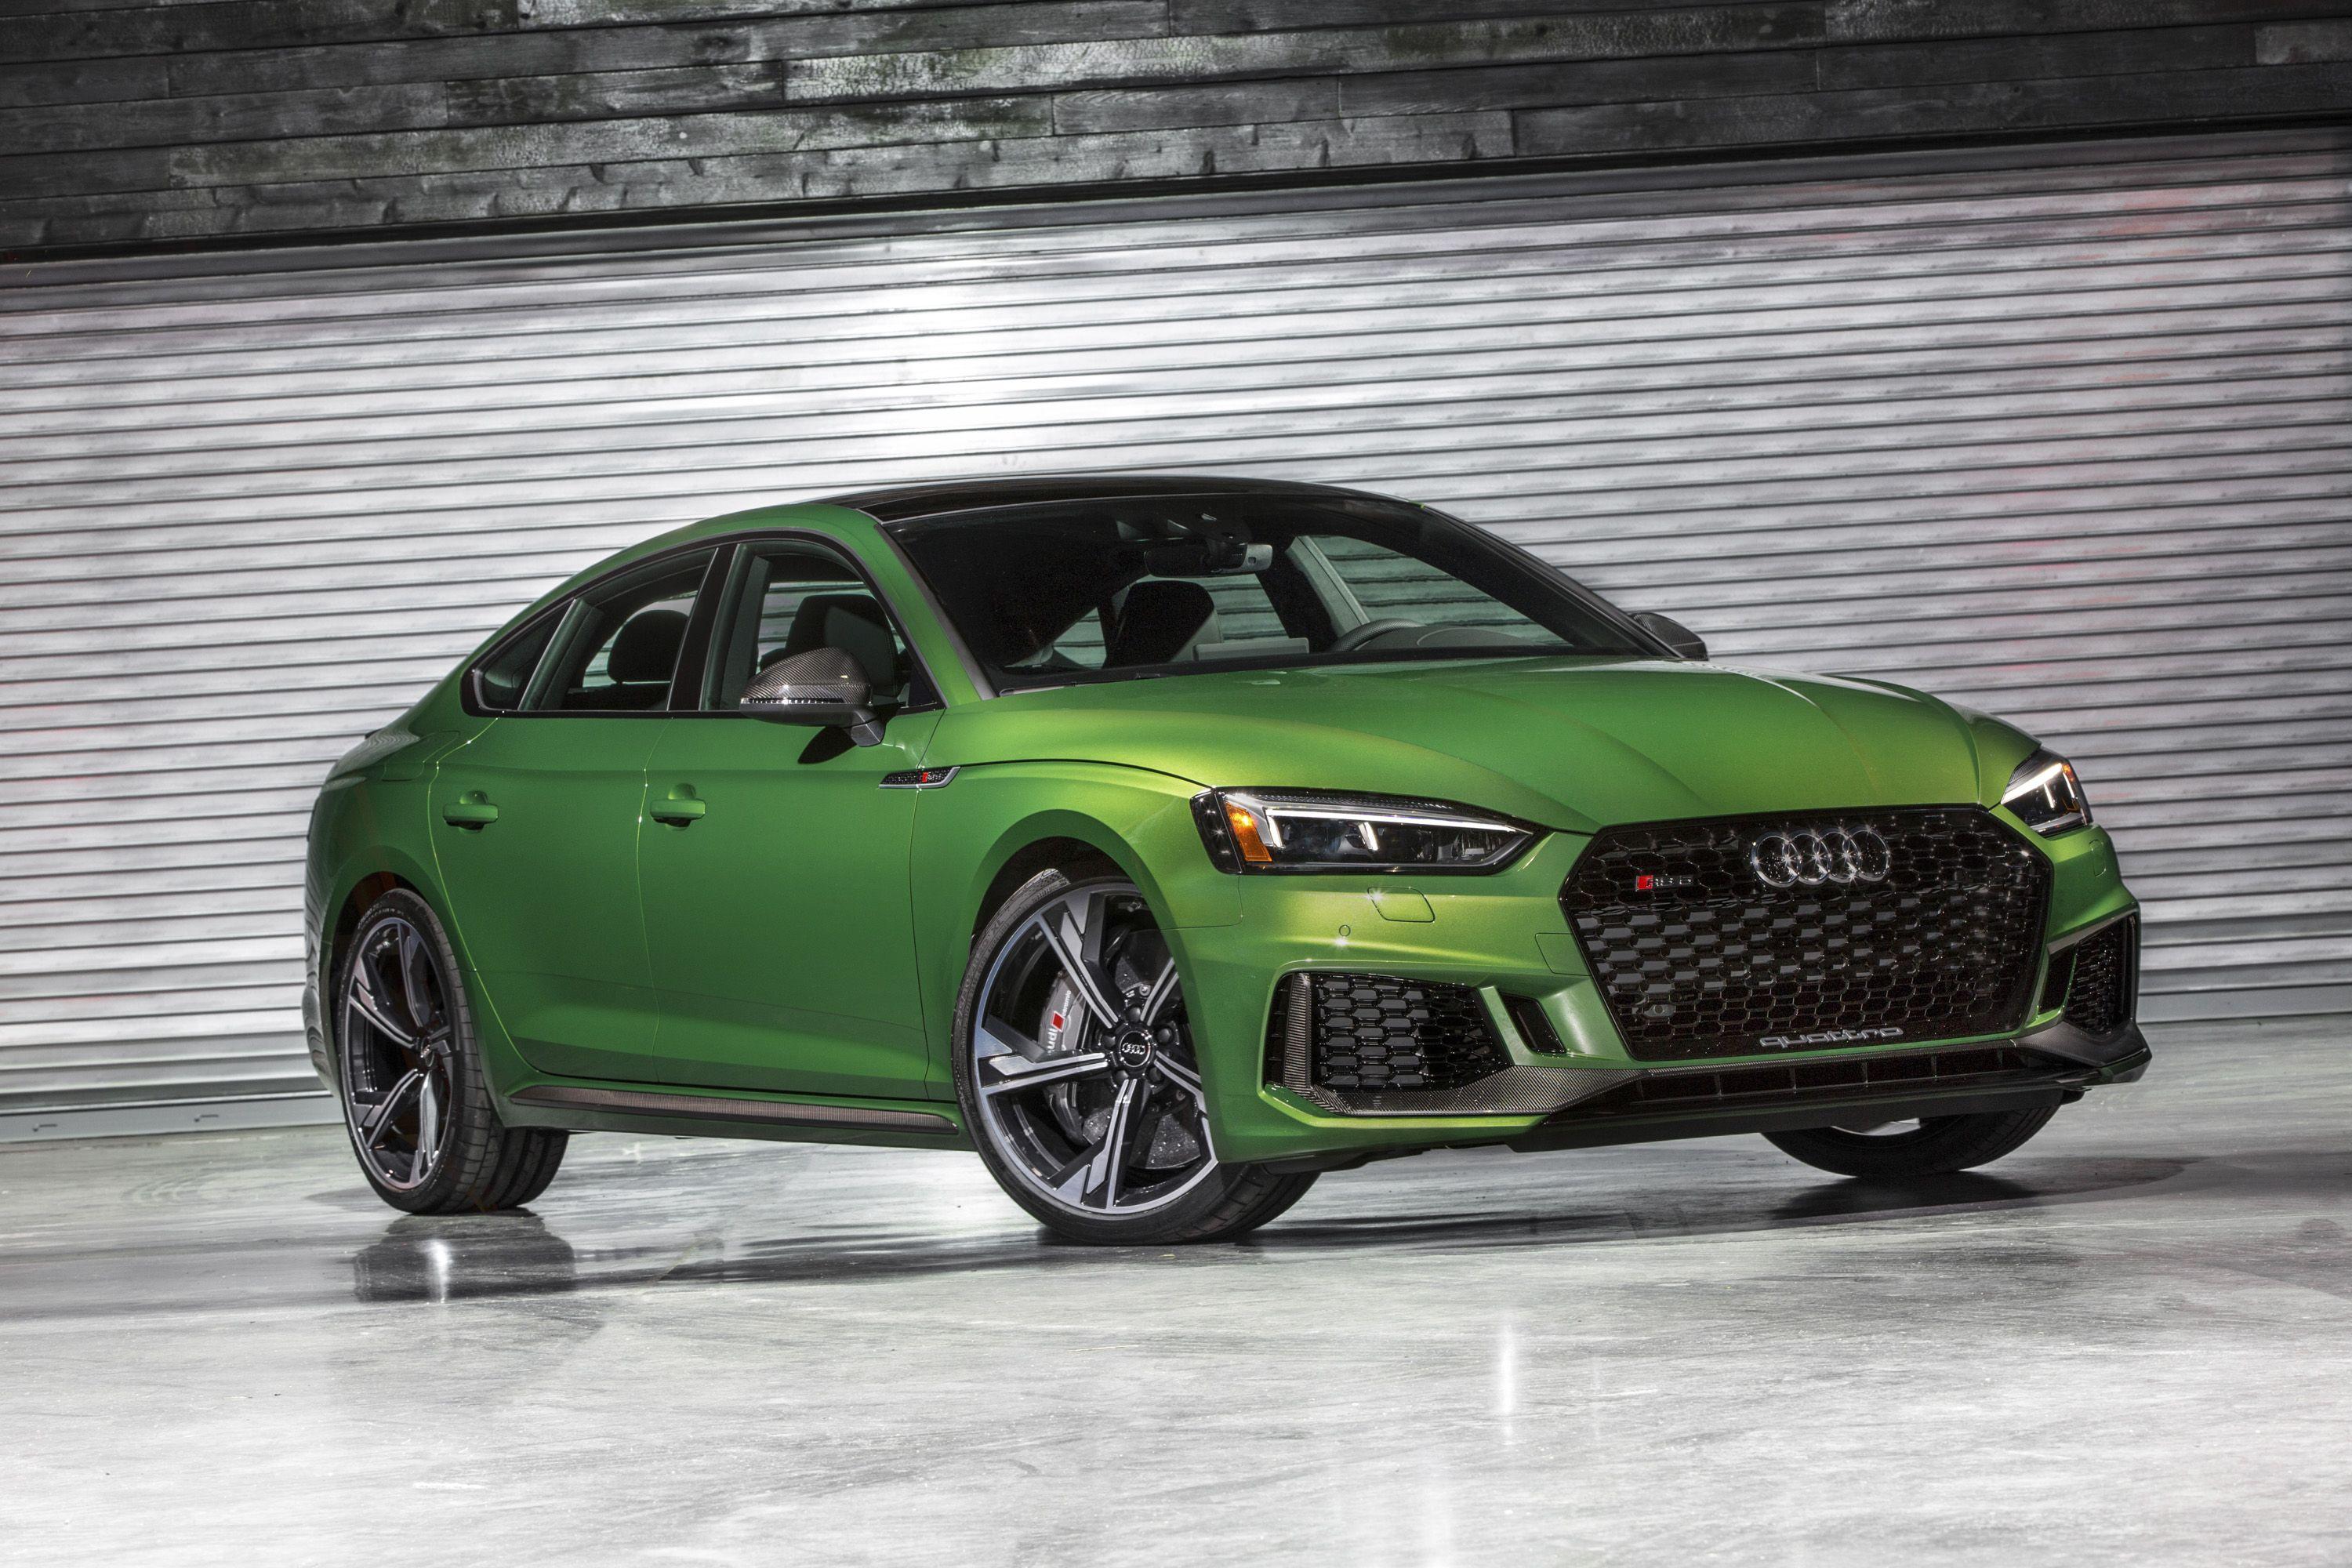 Wallpaper Of The Day: 2019 Audi RS5 Sportback